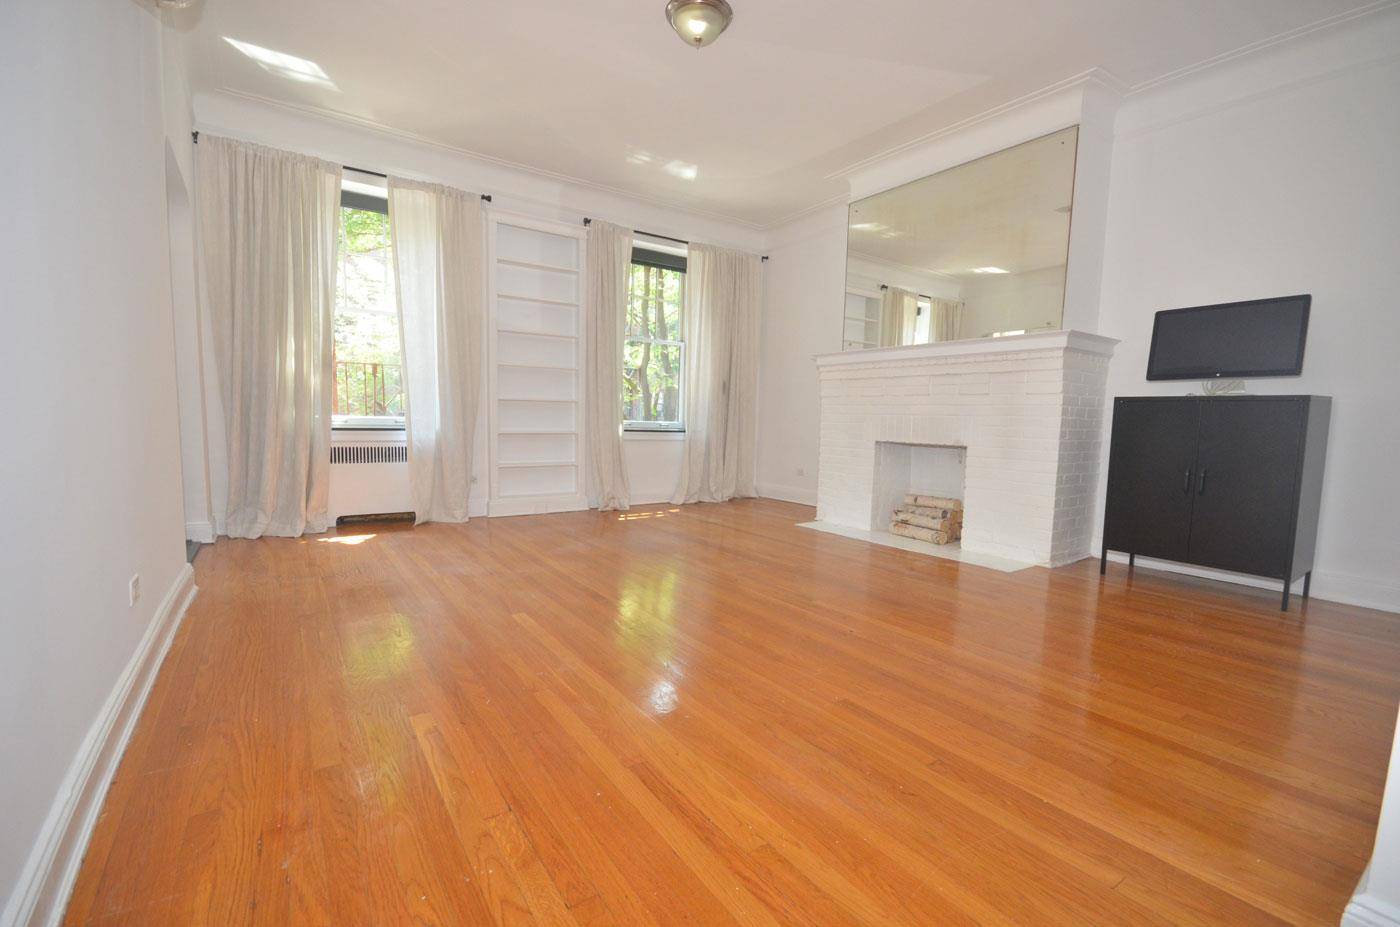 Large renovated Prewar one bedroom located on the 2nd floor.